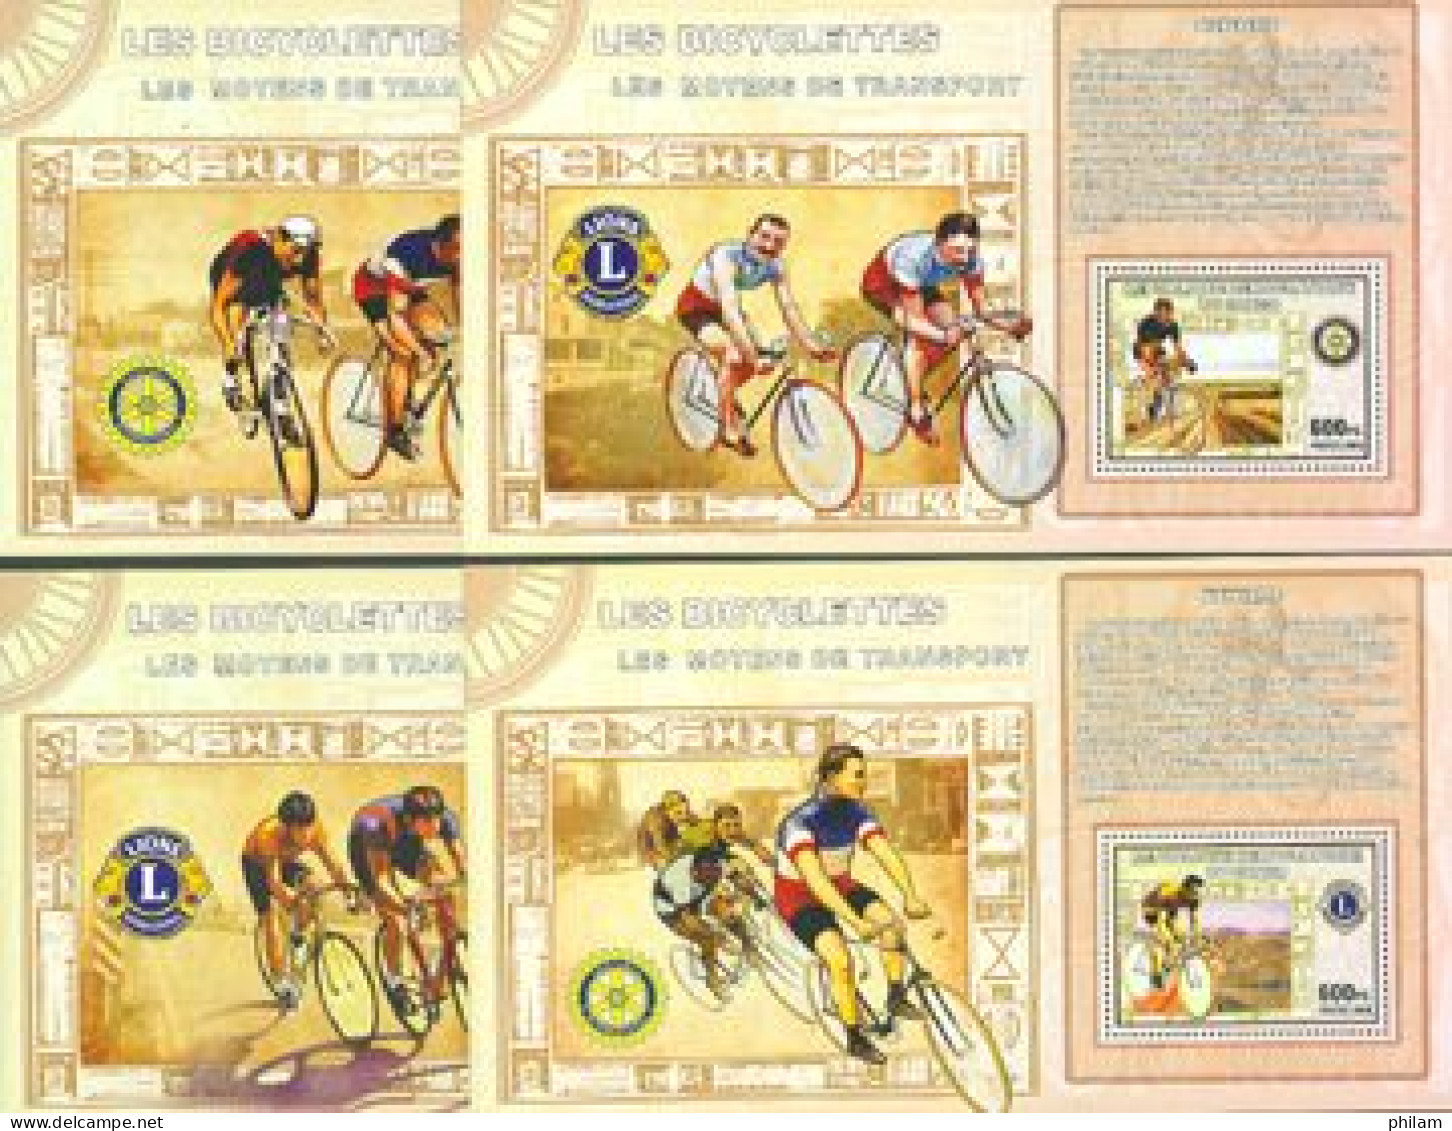 CONGO KINSHASA 2006 - Les Bicyclettes - Lions Club Et Rotary - 4 BF - Wielrennen